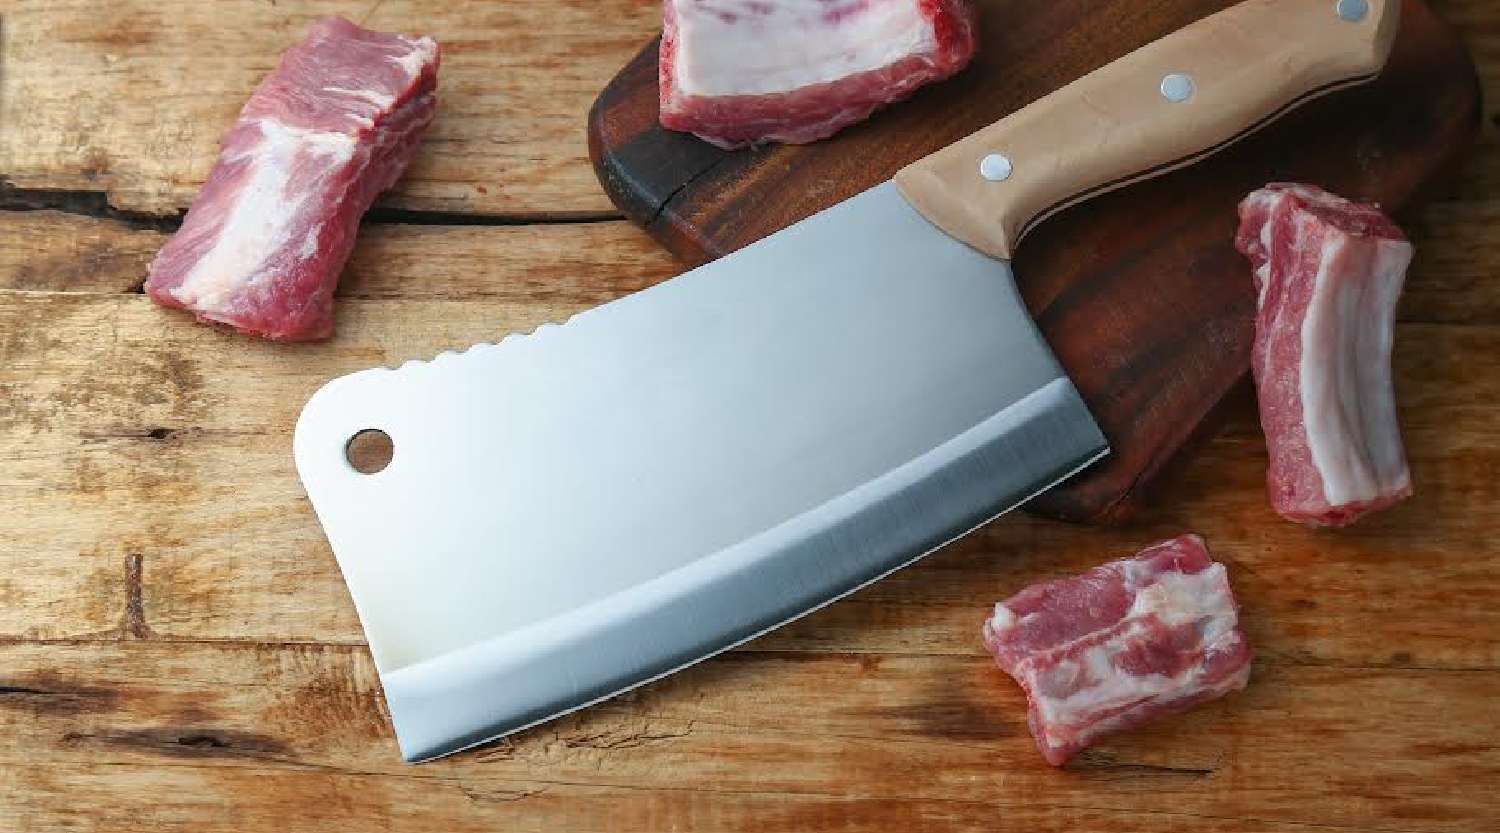 How to care for your butcher knives?